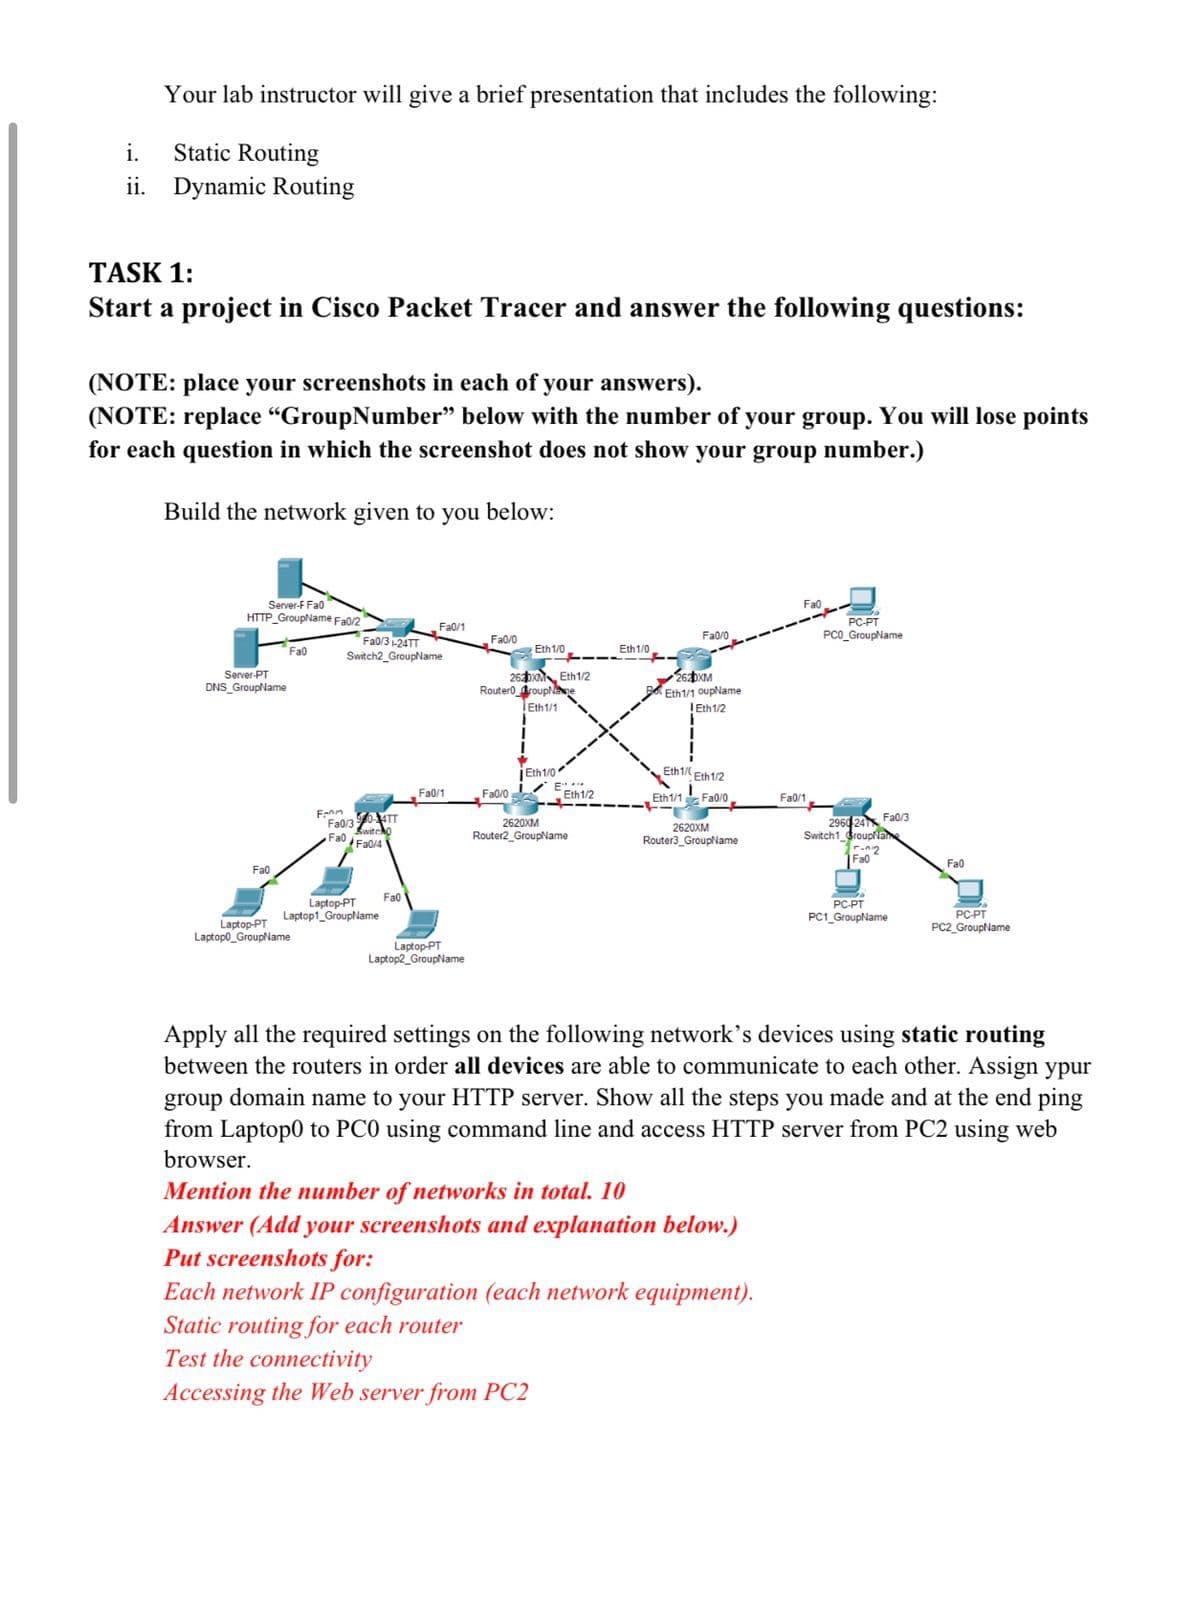 Your lab instructor will give a brief presentation that includes the following:
i.
Static Routing
ii. Dynamic Routing
TASK 1:
Start a project in Cisco Packet Tracer and answer the following questions:
(NOTE: place your screenshots in each of your answers).
(NOTE: replace “GroupNumber" below with the number of your group. You will lose points
for each question in which the screenshot does not show your group number.)
Build the network given to you below:
Server-F Fa0
HTTP GroupName Fa0/2"
Server-PT
DNS_GroupName
Fa0
Fa0
Fa0
Fa0/1
Fa0/3-24TT
Switch2_GroupName
Fa0/0
Fa0/0
PC-PT
PCO_GroupName
Eth 1/0
Eth 1/0
2620XM Eth1/2
Router roupNe
Eth1/1
2620XM
Eth1/1 oupName
Eth1/2
Fann
Fa0/304TT
Switcho
Fa0 Fa0/4
Fa0/1
Eth1/0
Fa0/0 E
Eth1/ Eth1/2
Eth 1/2
Eth1/1 Fa0/0
Fa0/1
2620XM
Router2_GroupName
2620XM
Router3_GroupName
Fa0
Laptop-PT
Laptop1_GroupName
Laptop-PT
Laptop2 GroupName
Laptop-PT
Laptopo_GroupName
Fa0/3
2960 241
Switch1 GroupNa
Fa0"
Fa0
PC-PT
PC1_GroupName
PC-PT
PC2_GroupName
Apply all the required settings on the following network's devices using static routing
between the routers in order all devices are able to communicate to each other. Assign ypur
group domain name to your HTTP server. Show all the steps you made and at the end ping
from Laptop0 to PCO using command line and access HTTP server from PC2 using web
browser.
Mention the number of networks in total. 10
Answer (Add your screenshots and explanation below.)
Put screenshots for:
Each network IP configuration (each network equipment).
Static routing for each router
Test the connectivity
Accessing the Web server from PC2